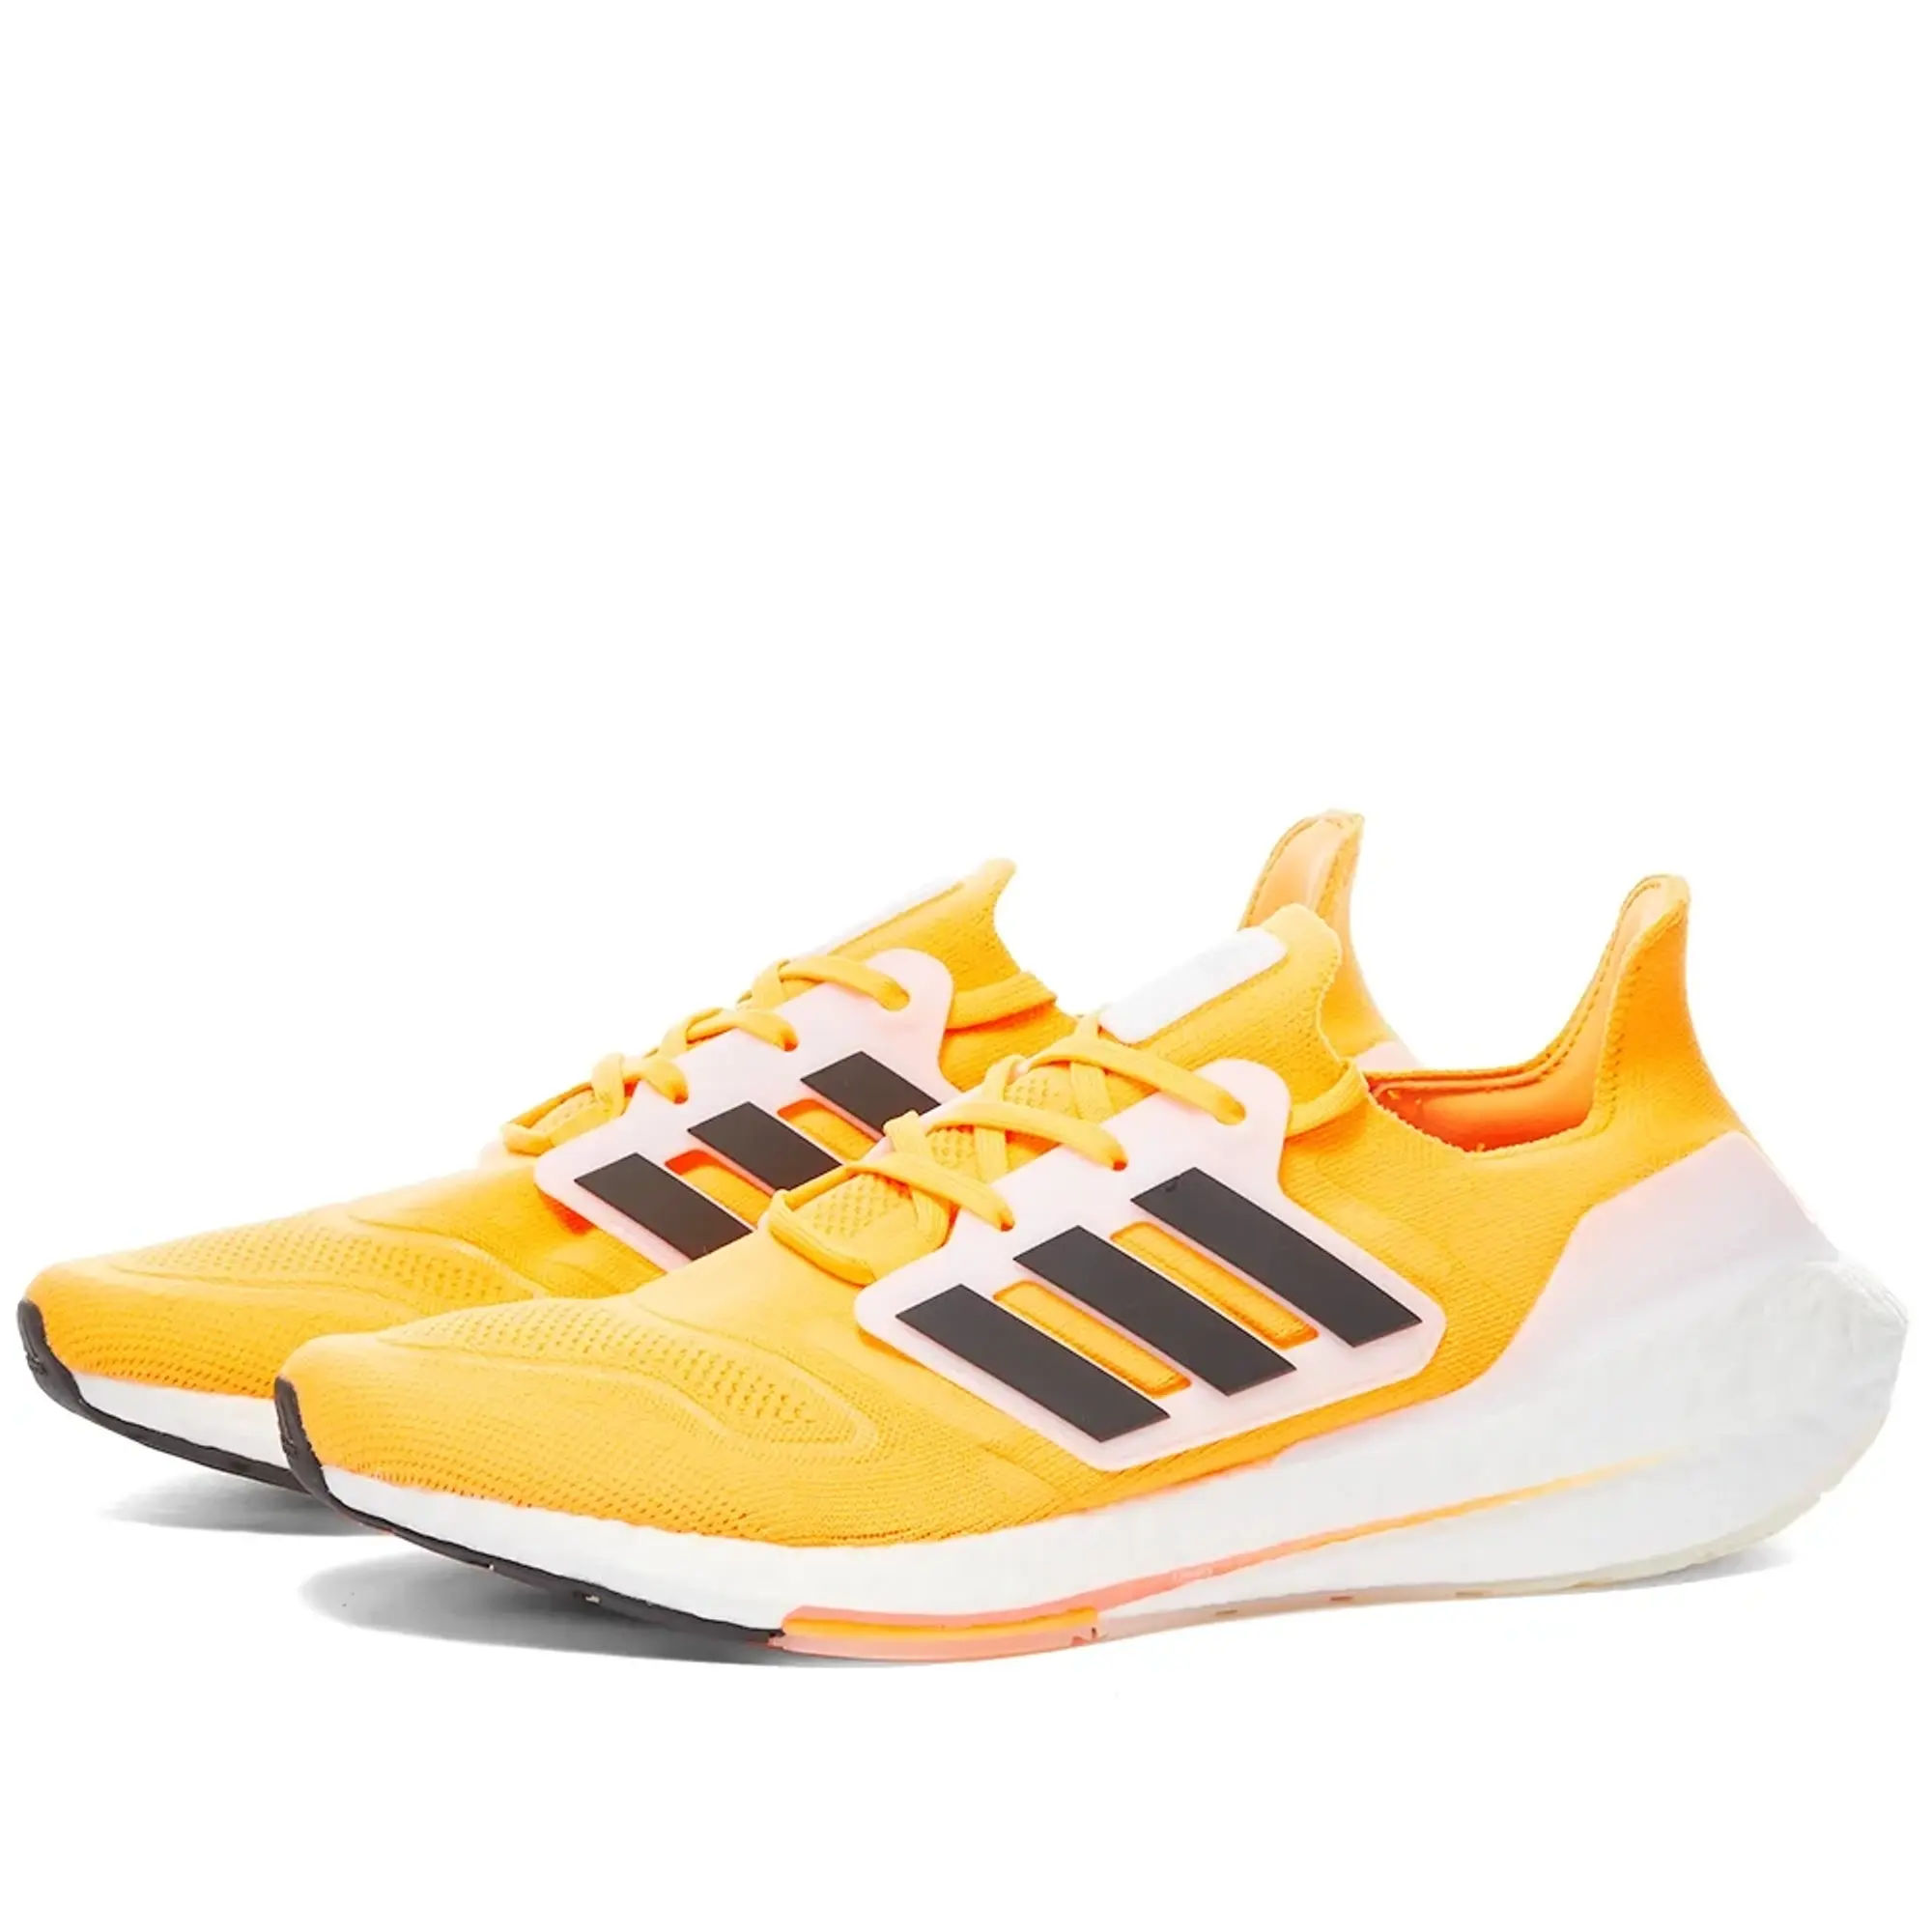 adidas Mens Ultraboost 22 Sky Running Shoes in Orange Textile